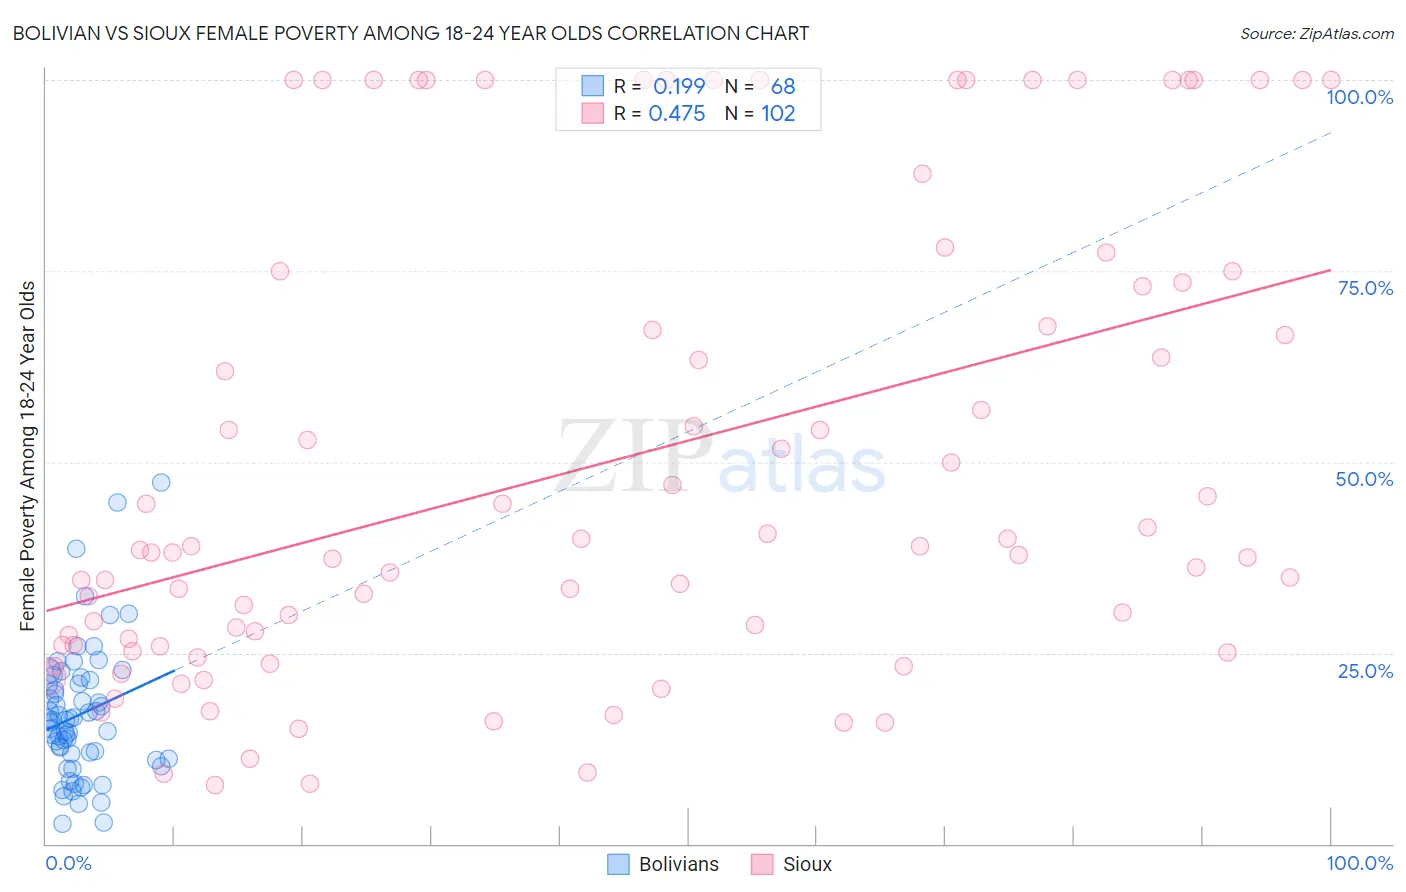 Bolivian vs Sioux Female Poverty Among 18-24 Year Olds